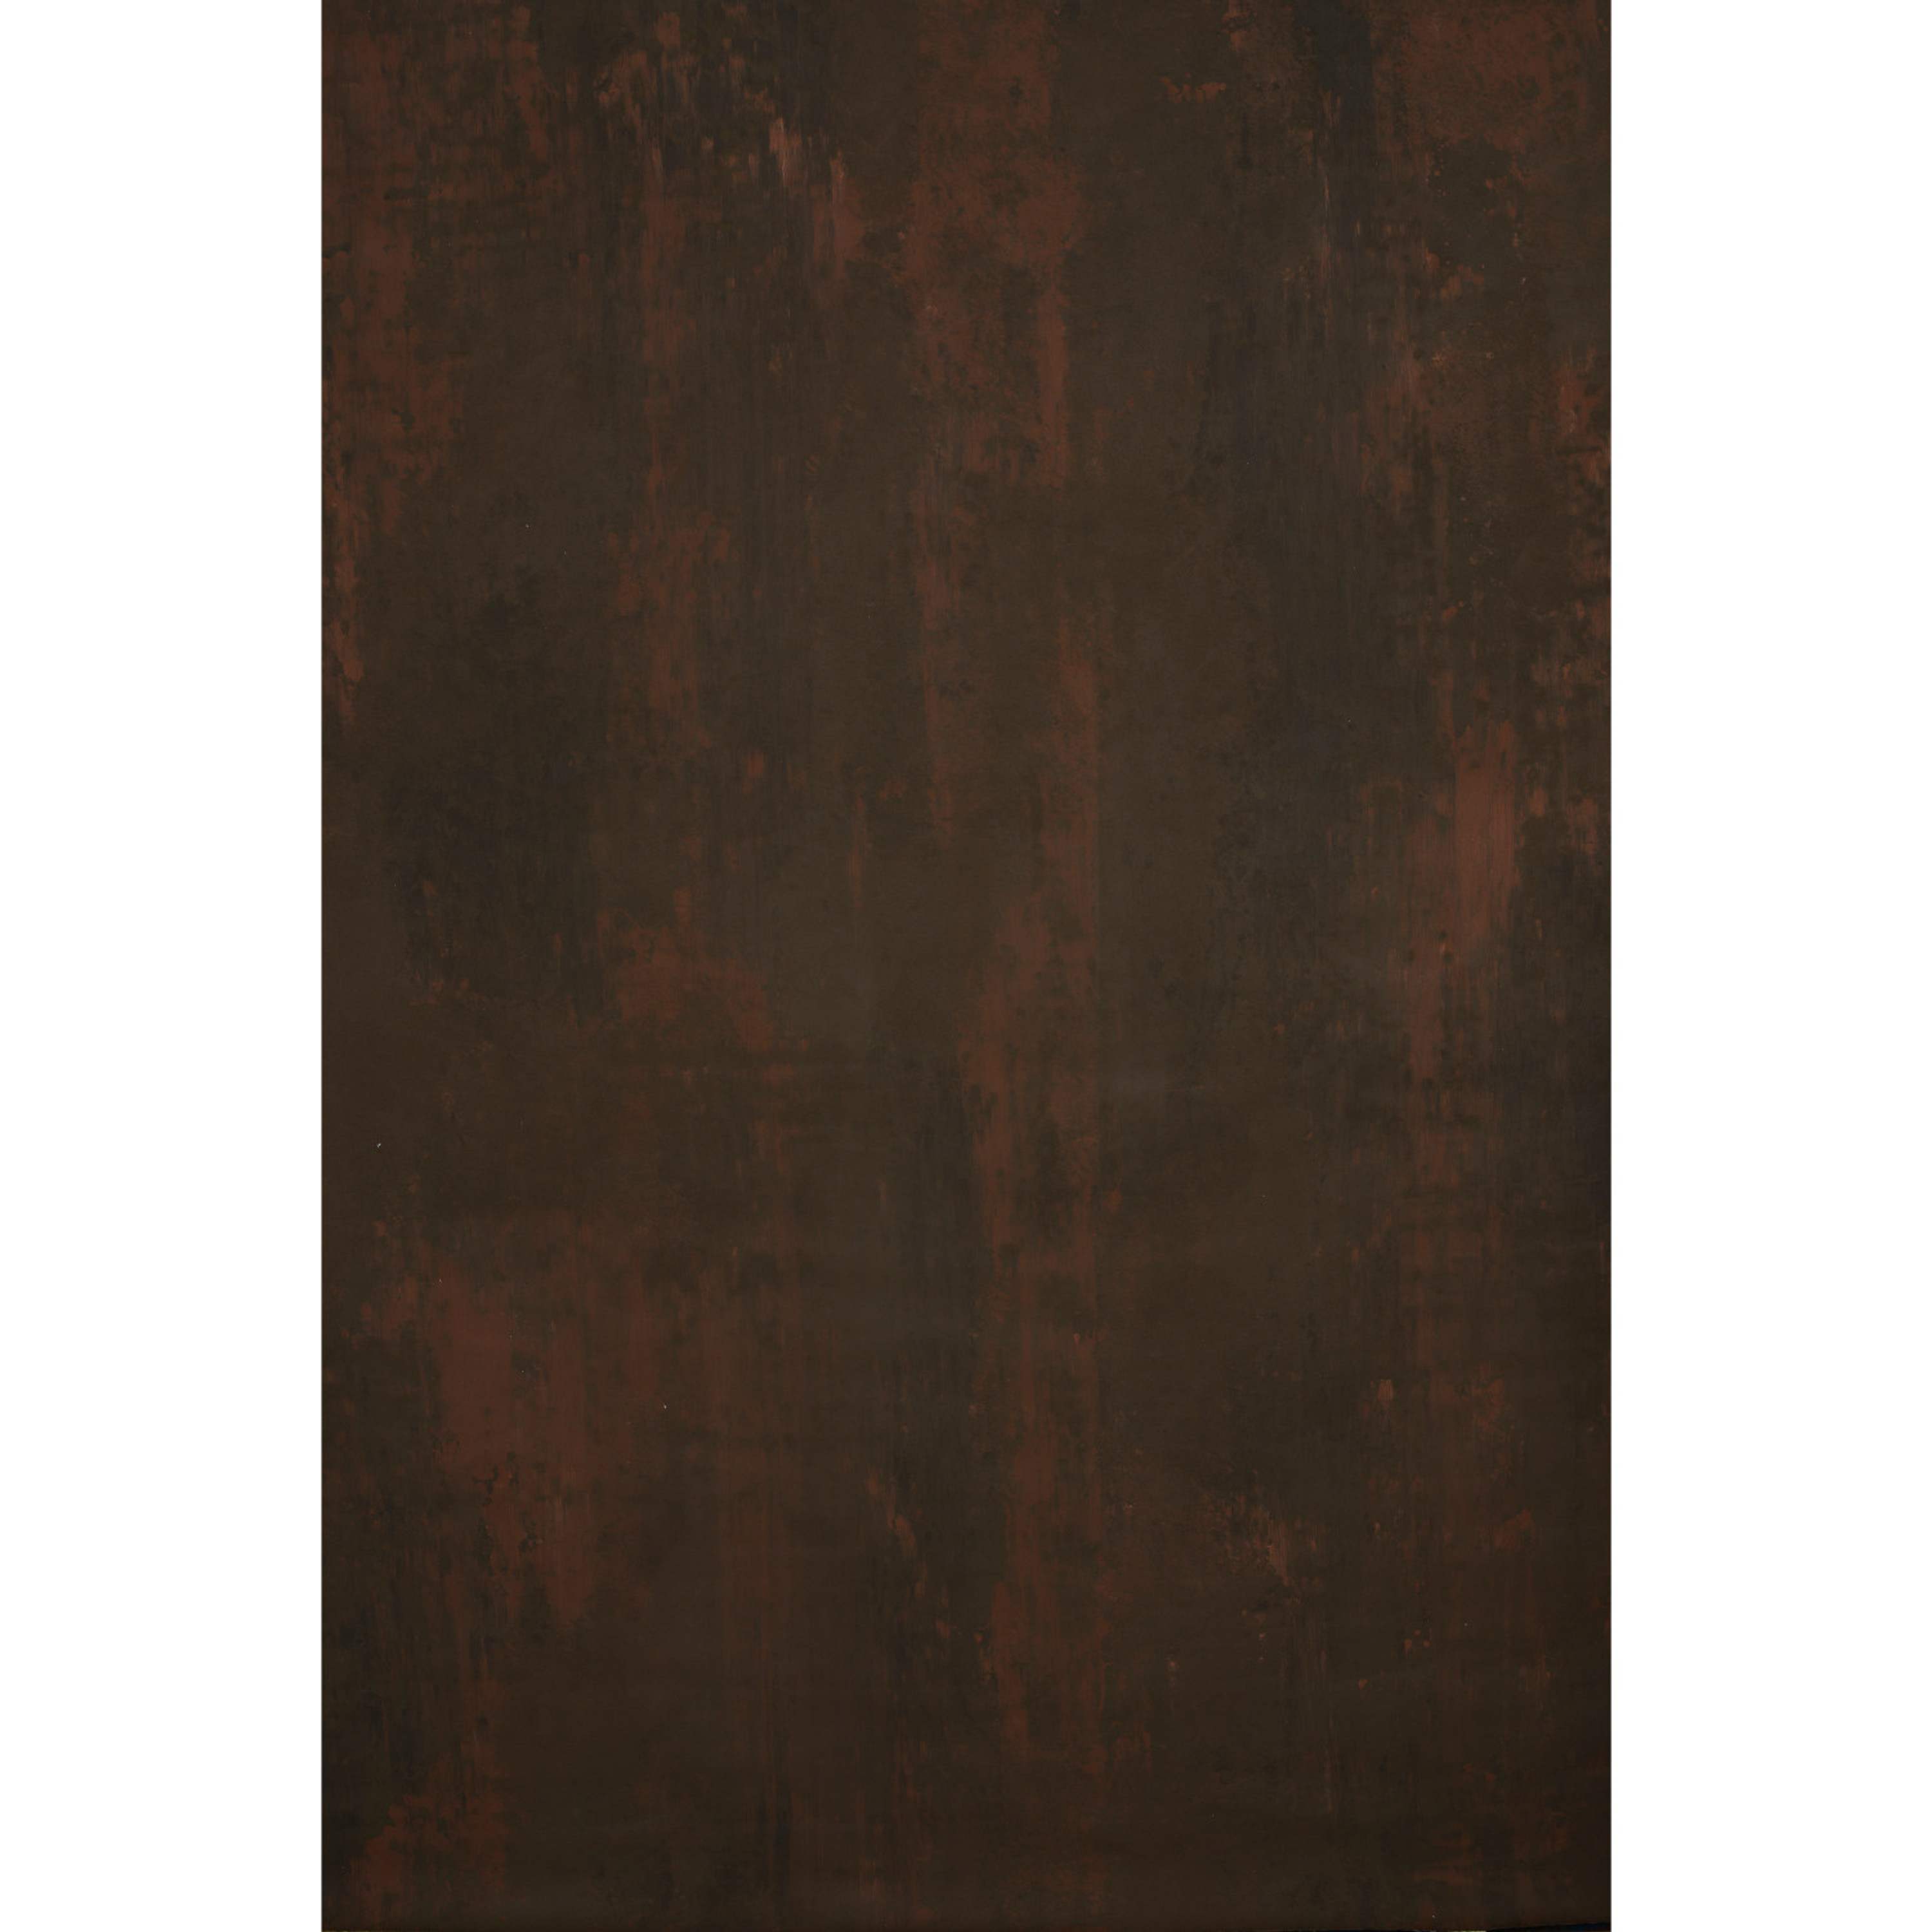 Gravity Backdrops Brown Strong Texture LG (SN: 11074)